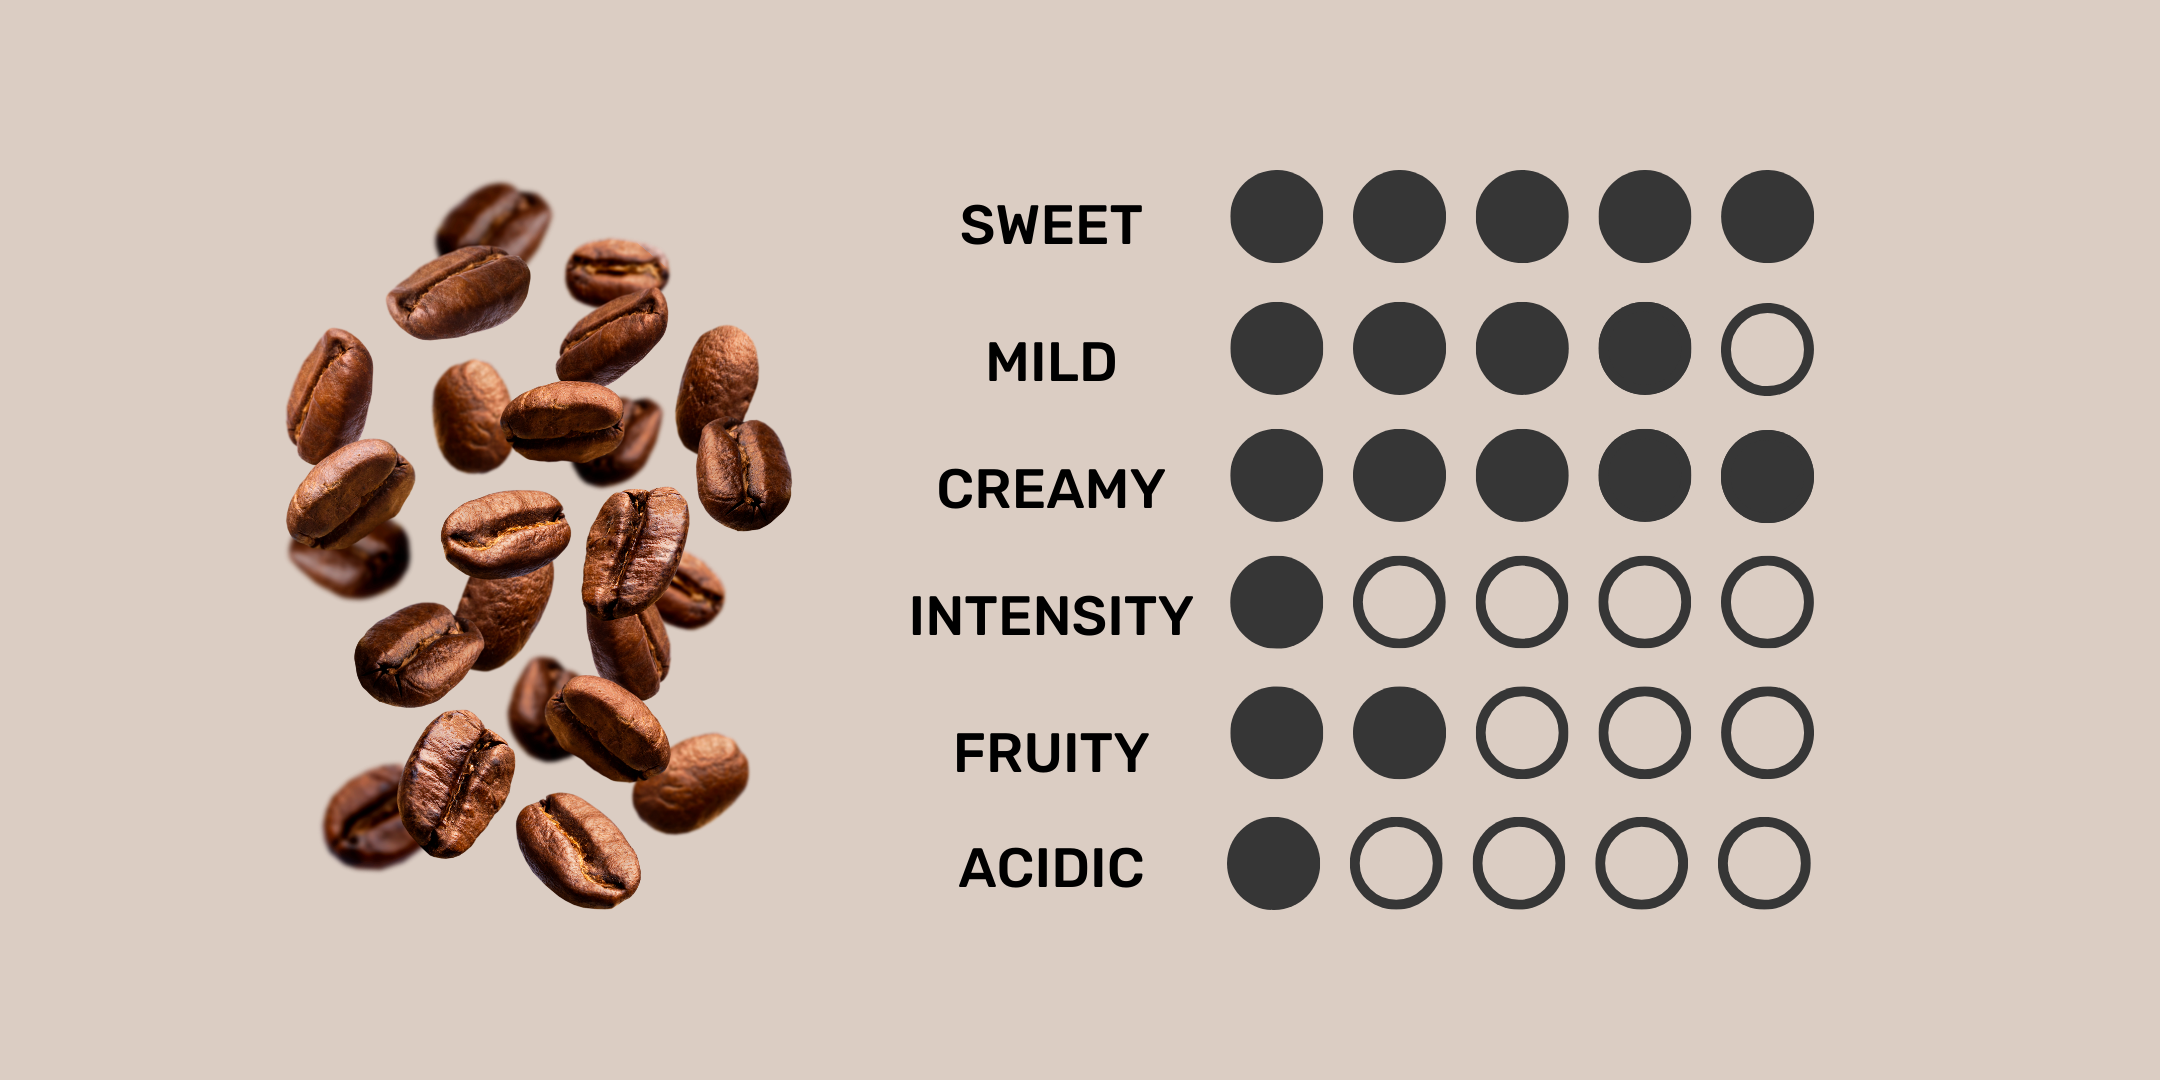 Peak Flavor Coffee is naturally sweet, mild, and creamy